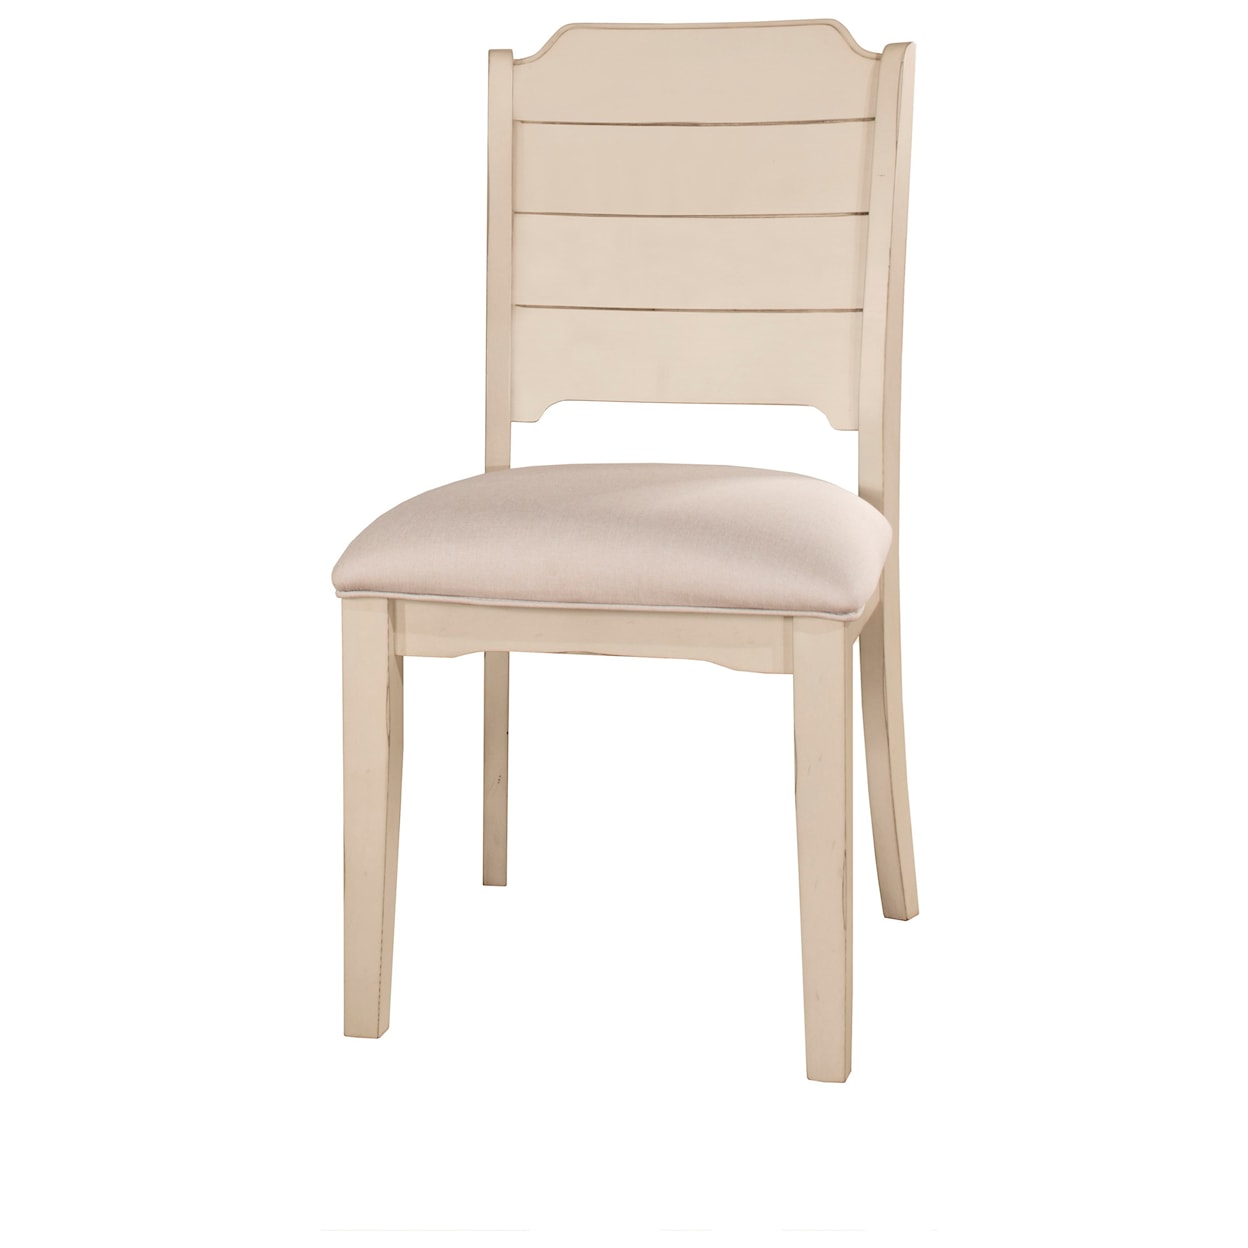 Hillsdale Clarion Dining Side Chair - Set of 2